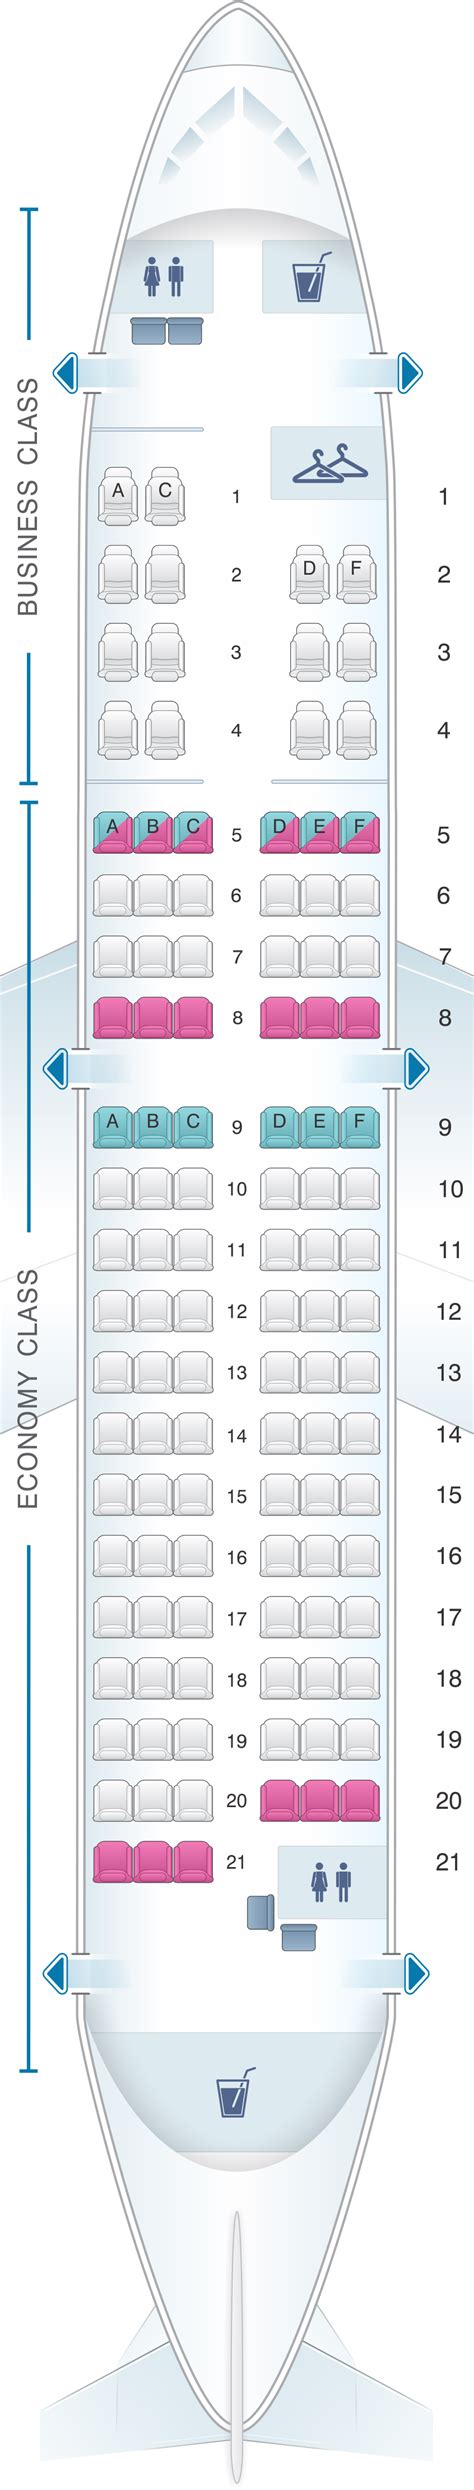 Seat Map Tarom Airbus A318 111 113pax